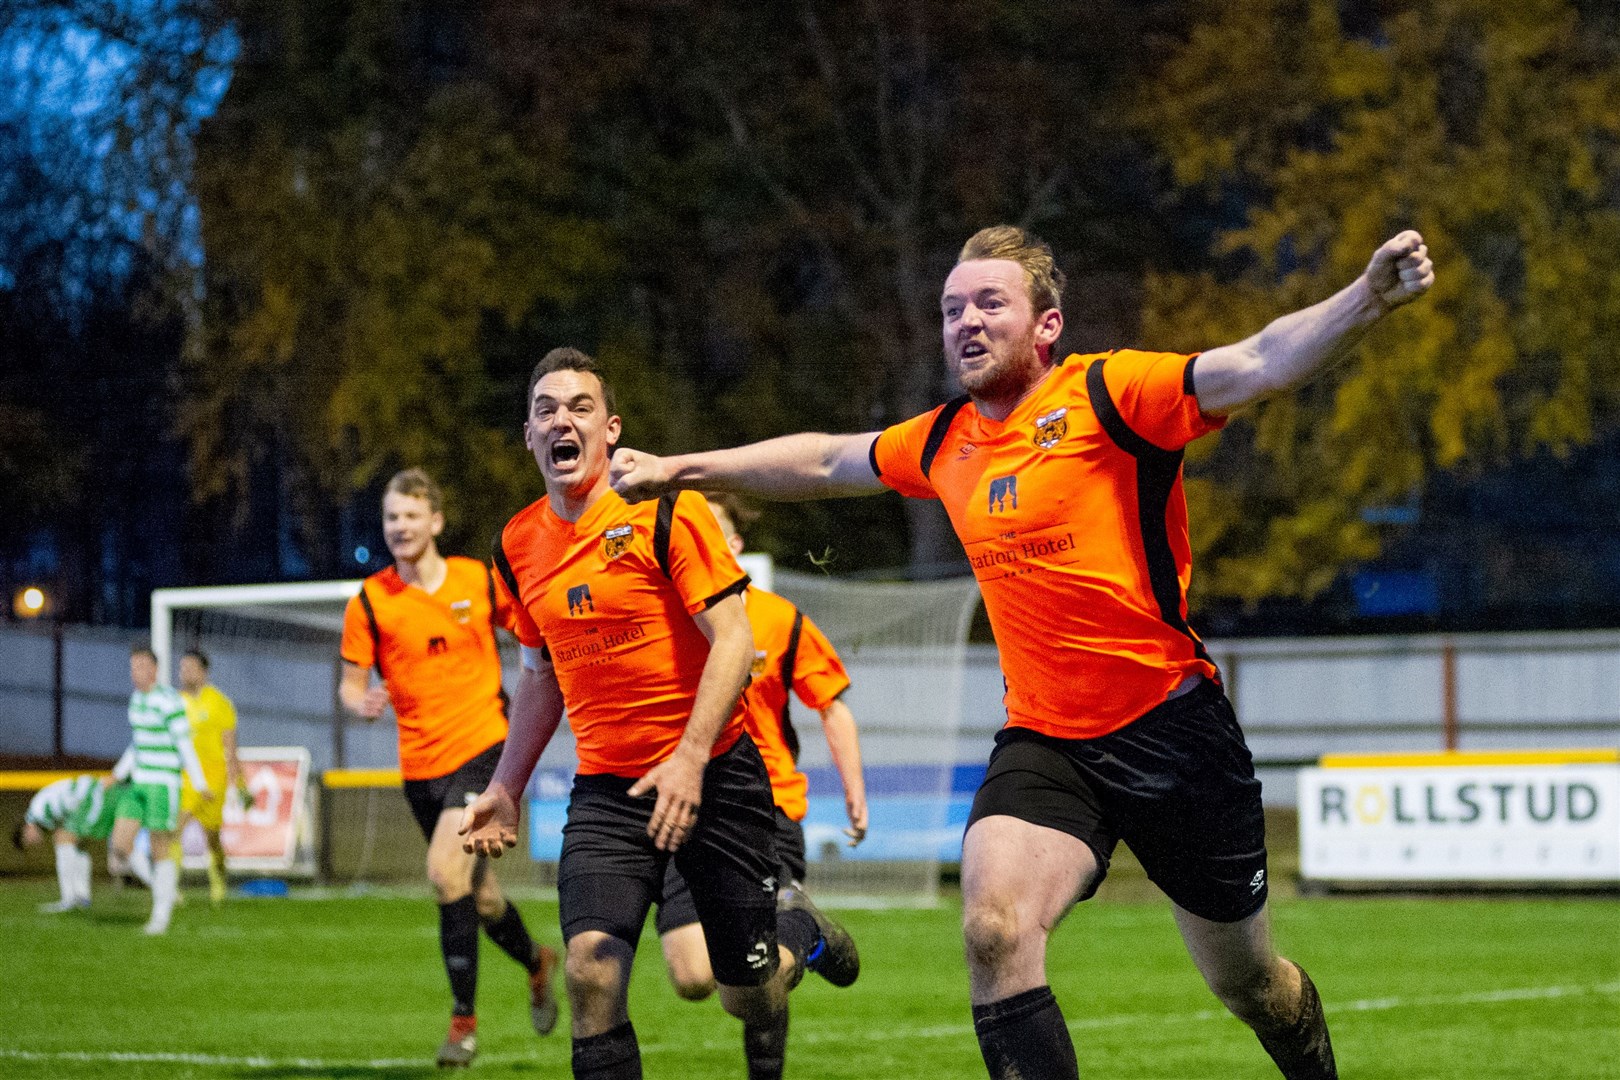 Paul MacLeod (Right) wheels away to celebrate scoring the winner for the Speysiders...Rothes FC (2) vs Buckie Thistle FC (1) - Highland League Cup Final - Christie Park, Huntly 31/10/2020...Picture: Daniel Forsyth..